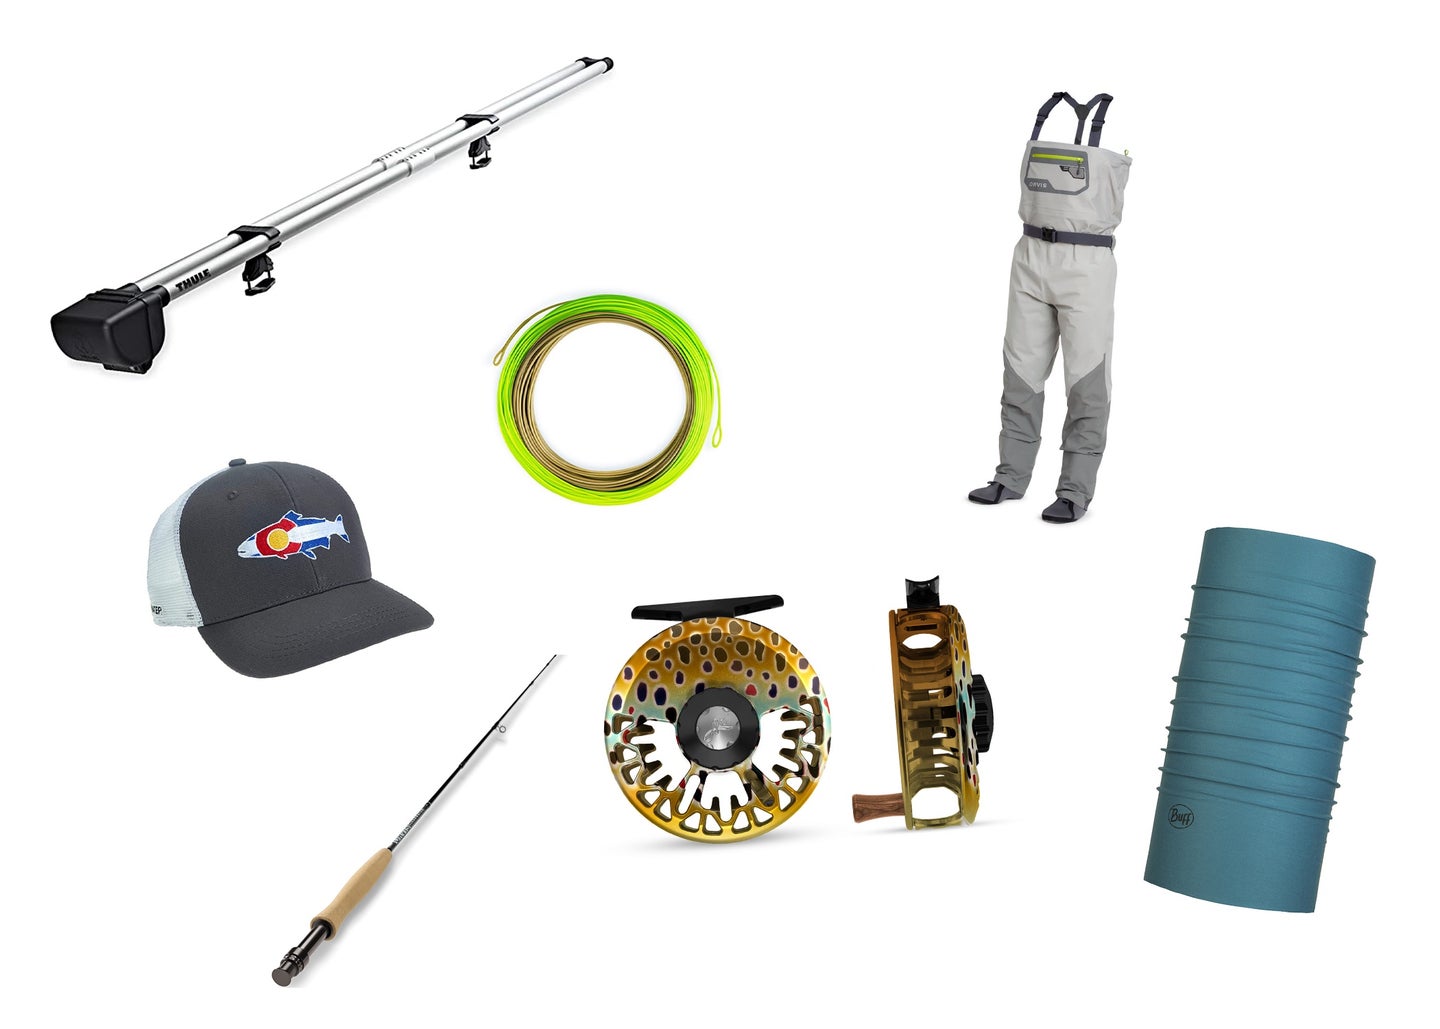 Fly fishing gift guide